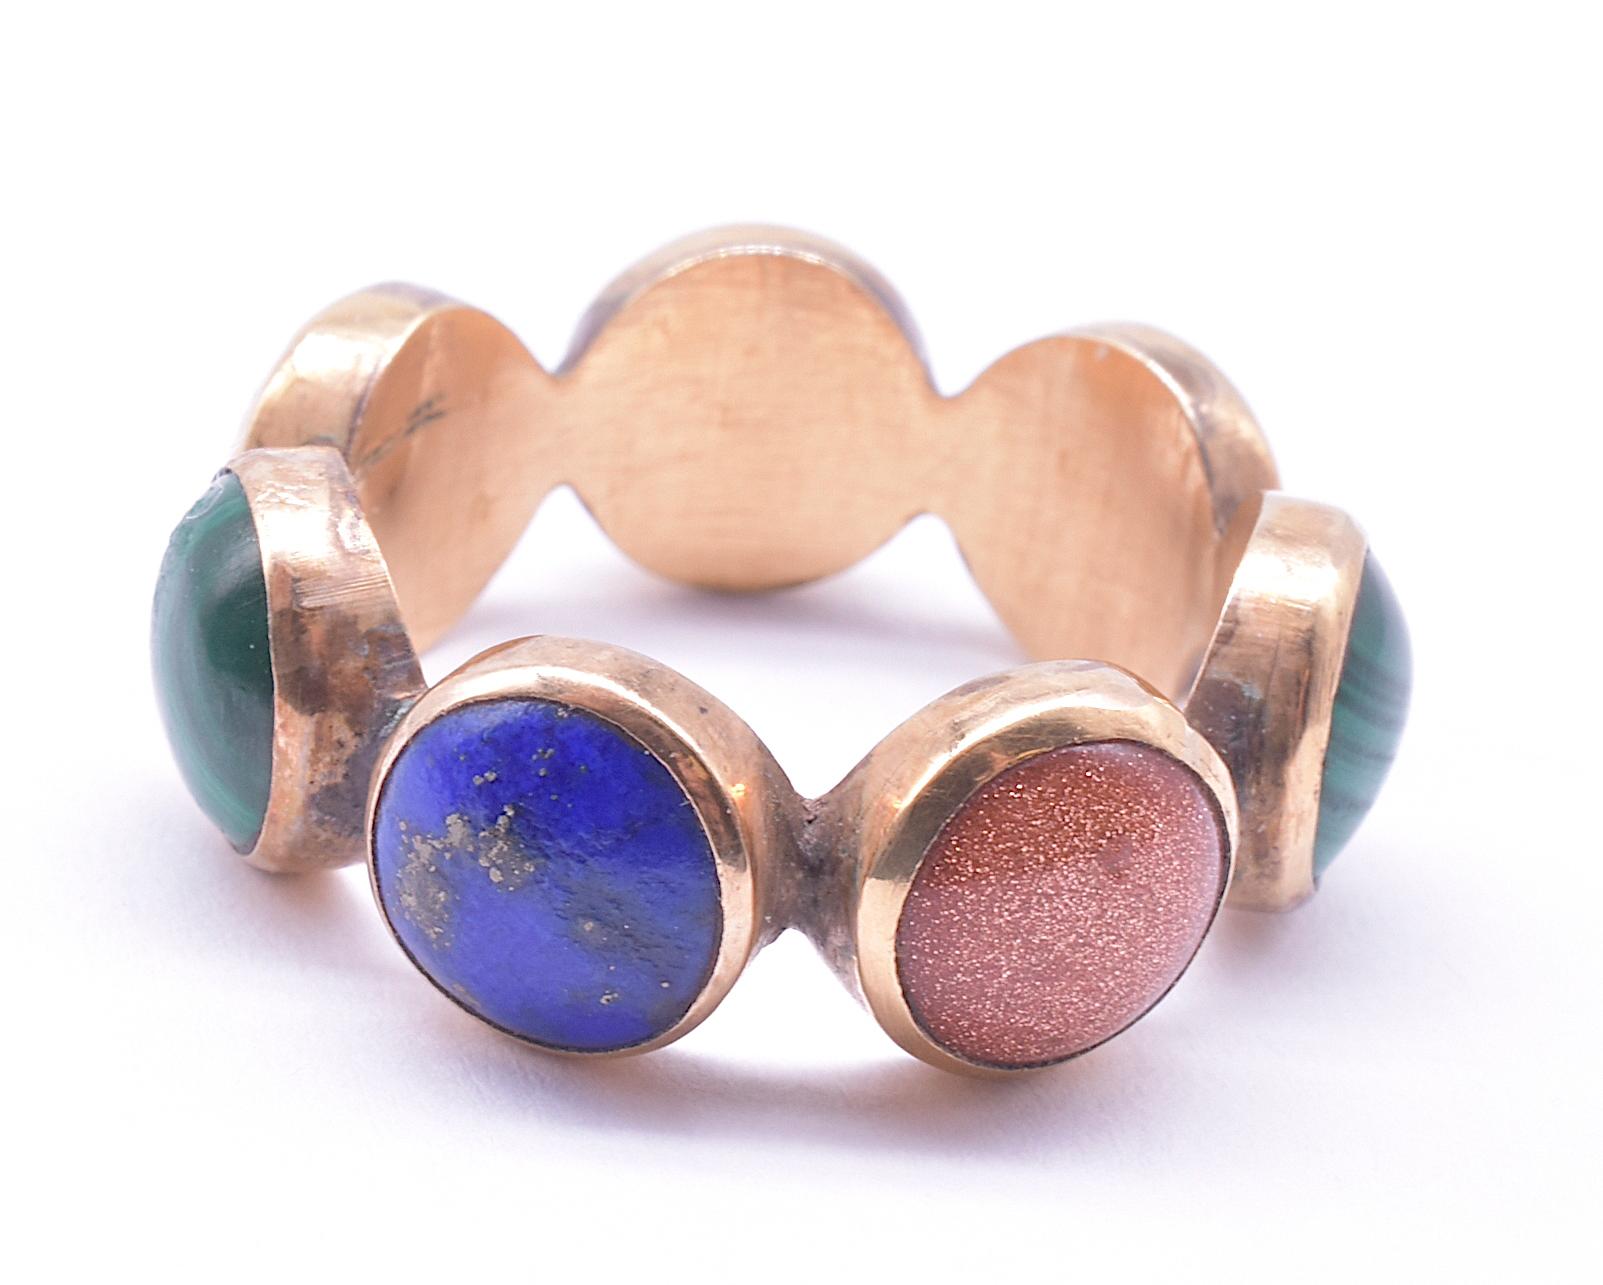 Our rare Georgian planetary ring is made up of seven stones cut and polished en cabochon; 2 lapiz lazuli (blue),  2 goldstone (glass with copper flecks), 2 malachite (green) and one red agate. The deep colors of the stone make this ring mesmerizing.